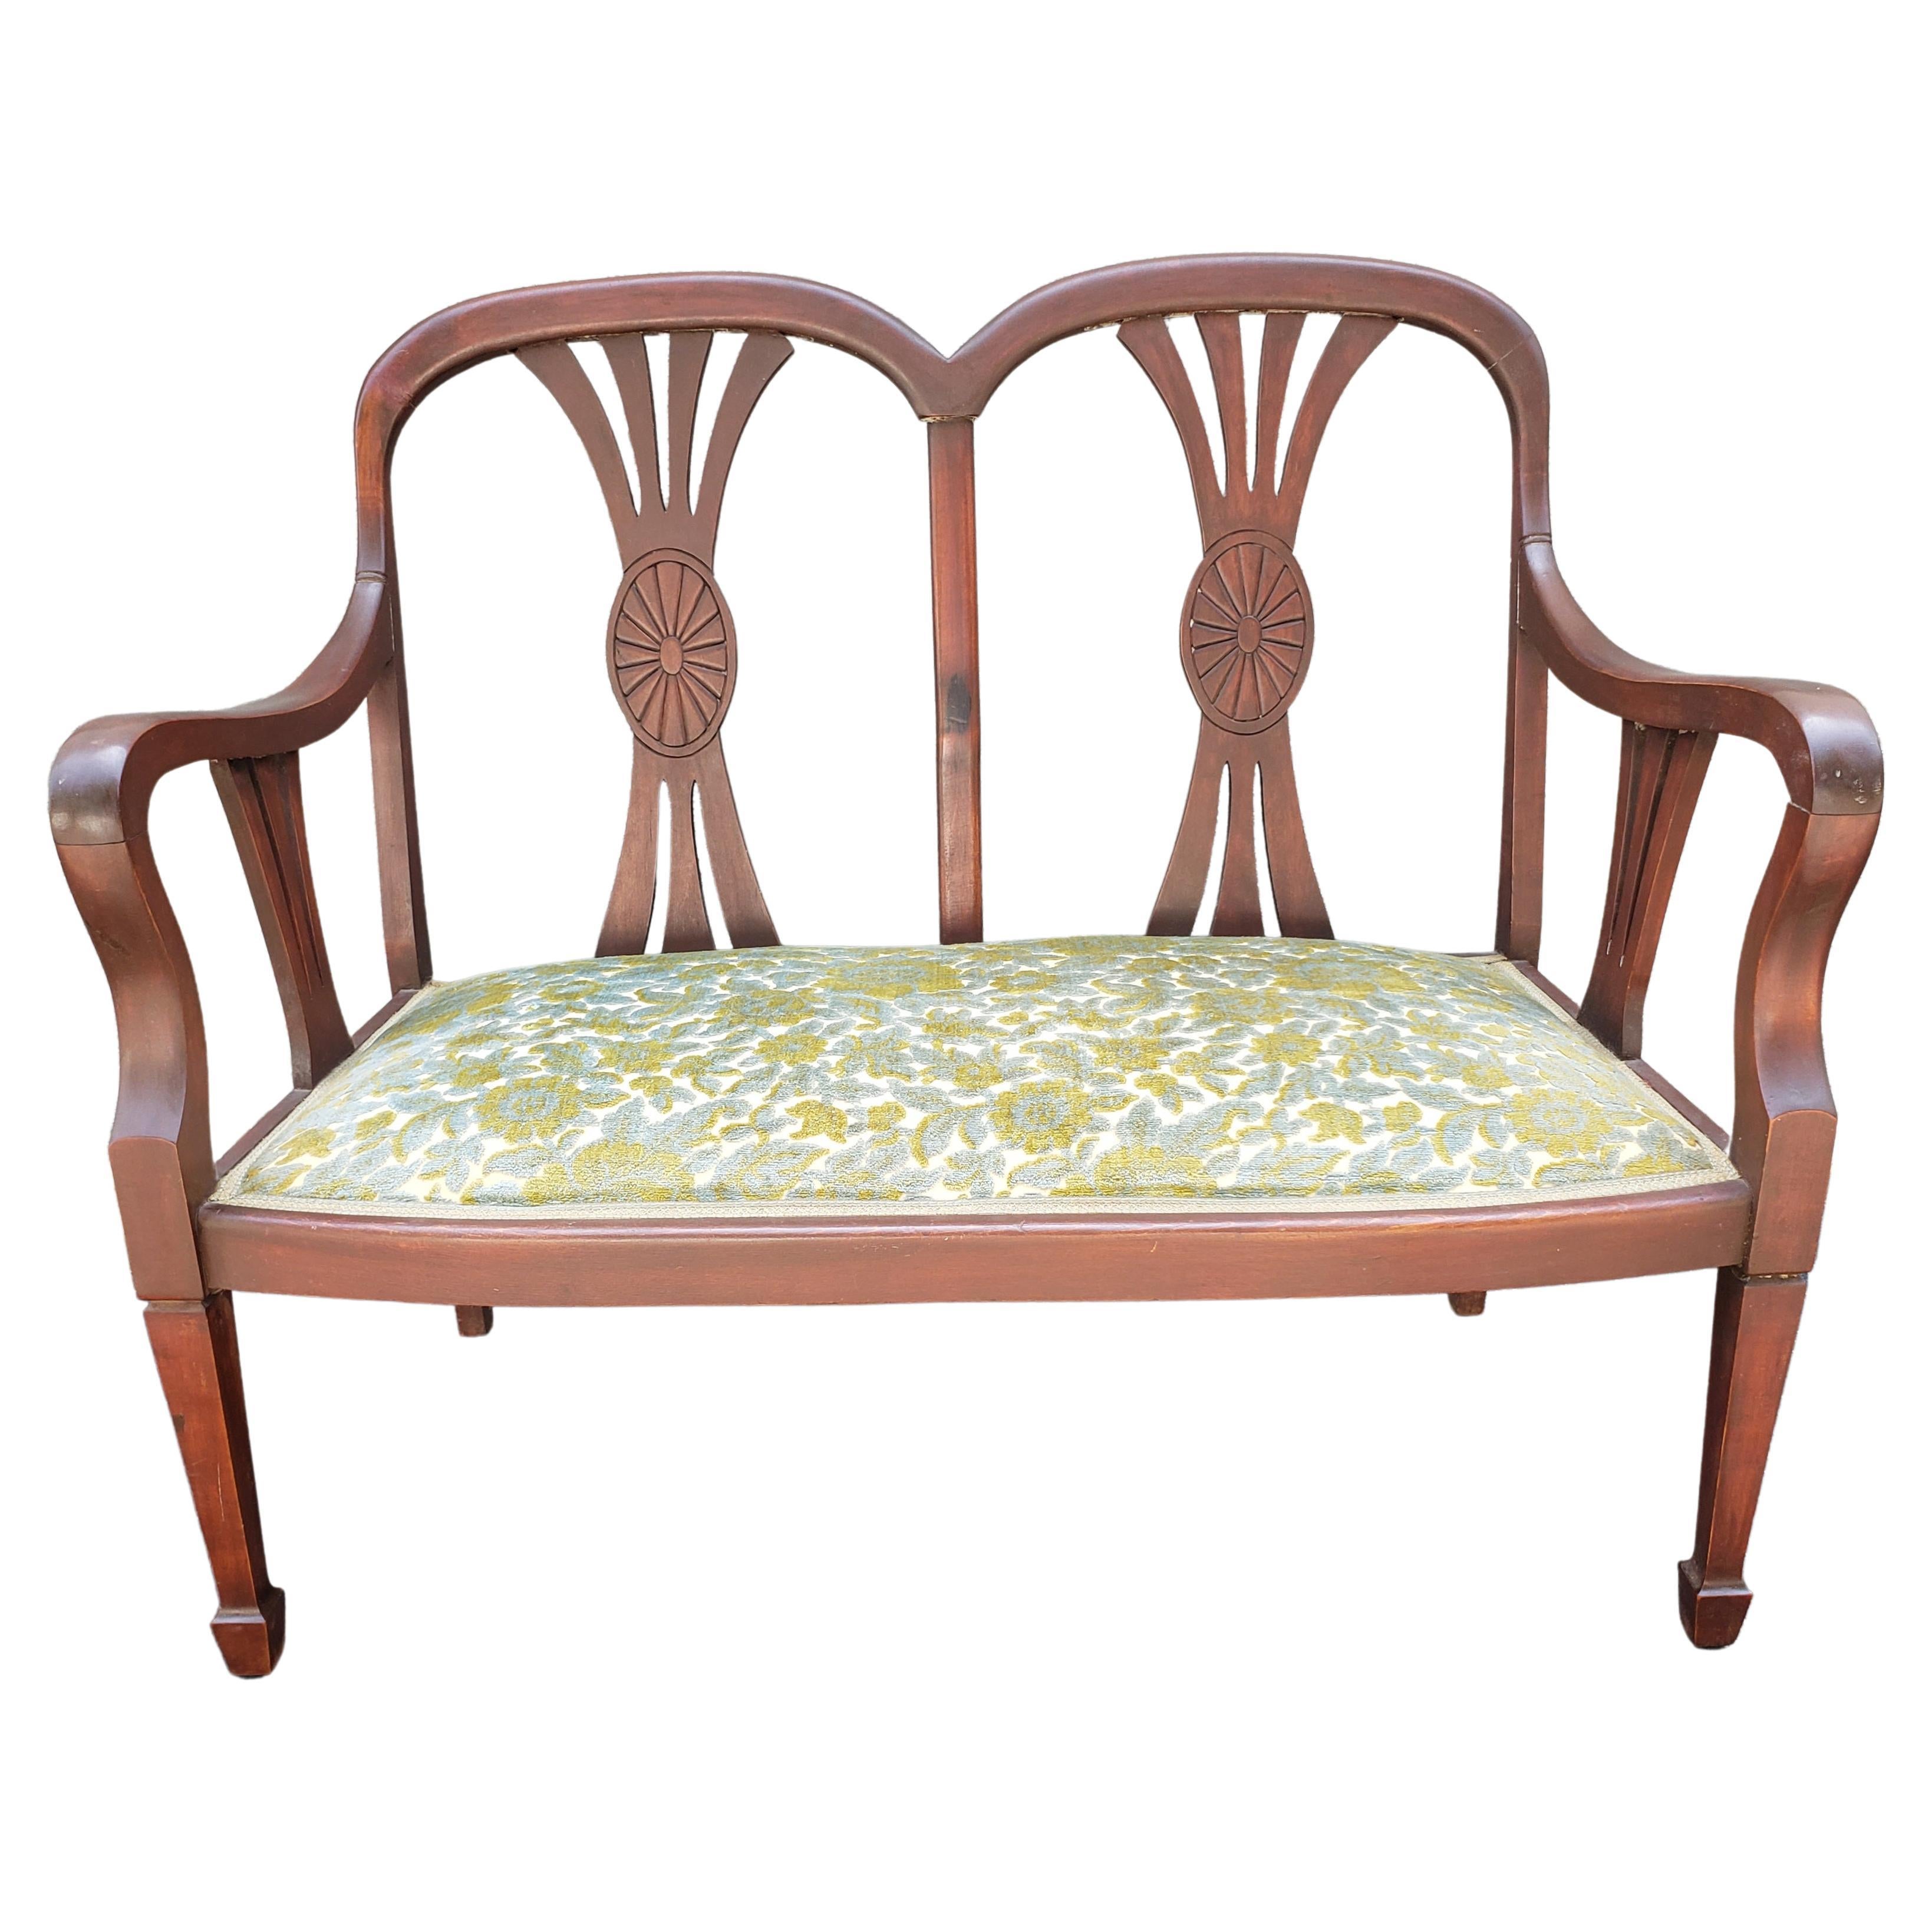 1930s Federal Style Mahogany and Crewel Upholstered Settee in good condition. 
Measures 44